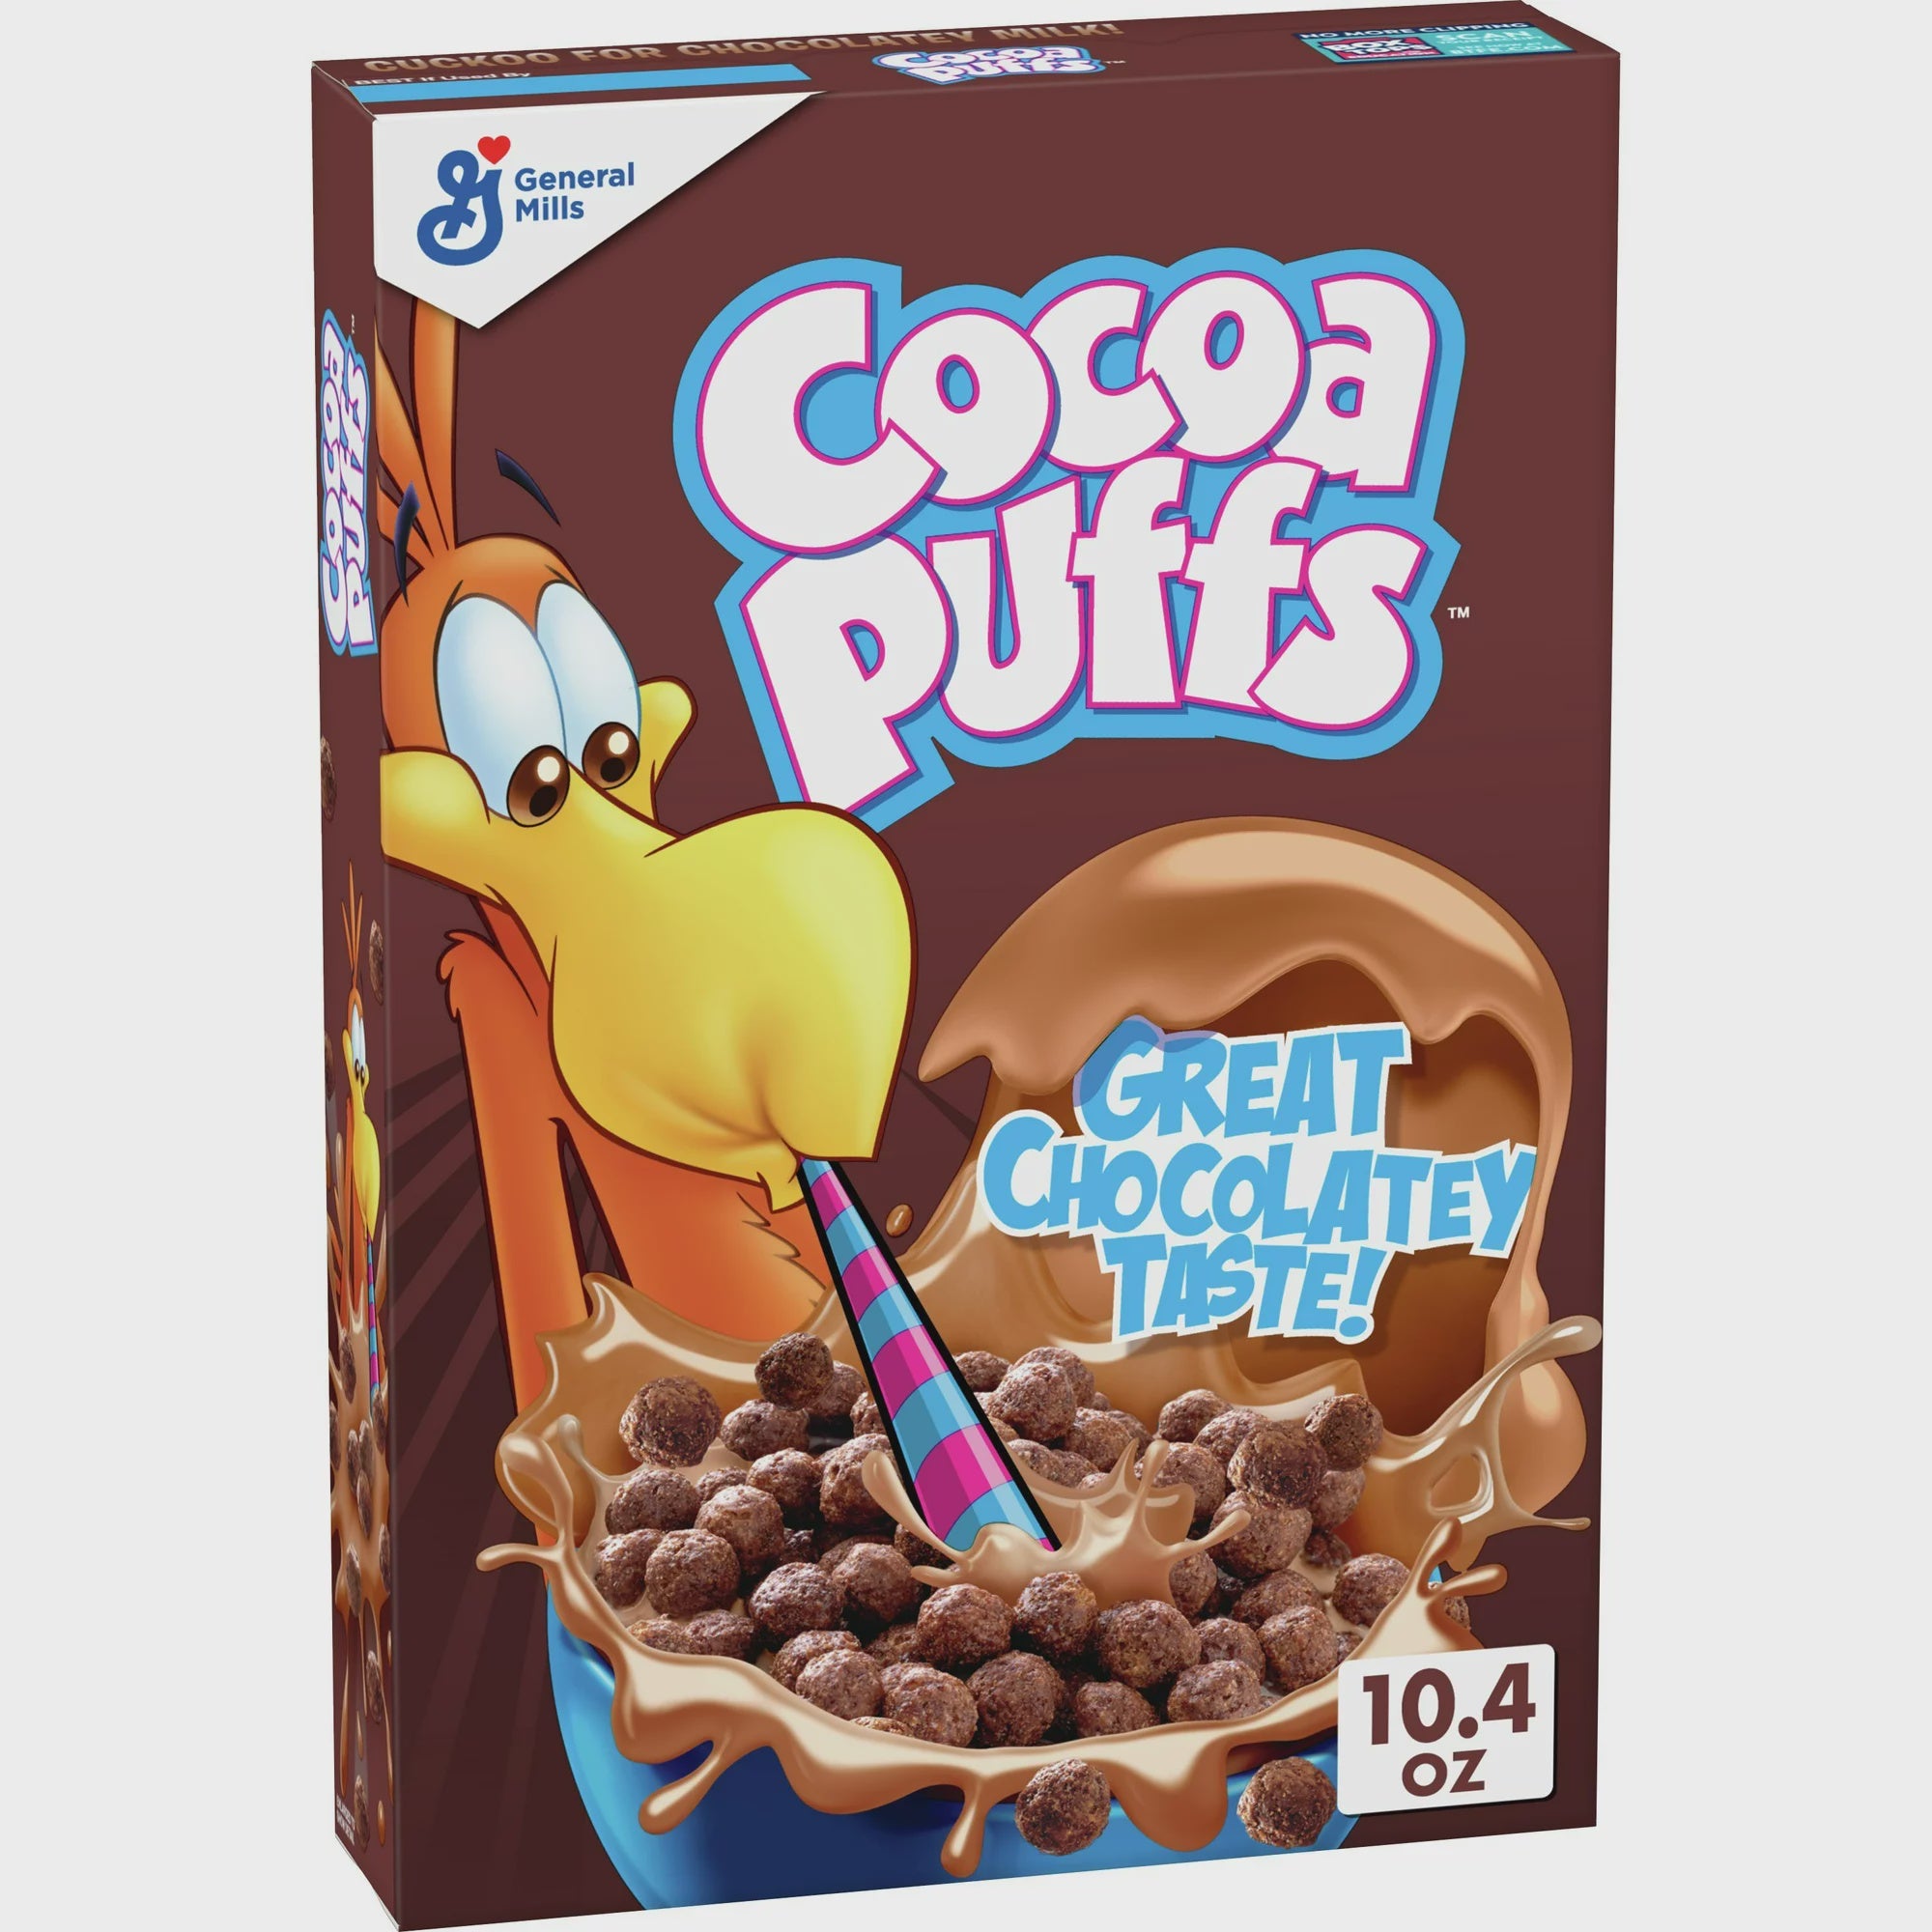 GENERAL MILLS Cocoa Puffs Cereal 10.4 oz